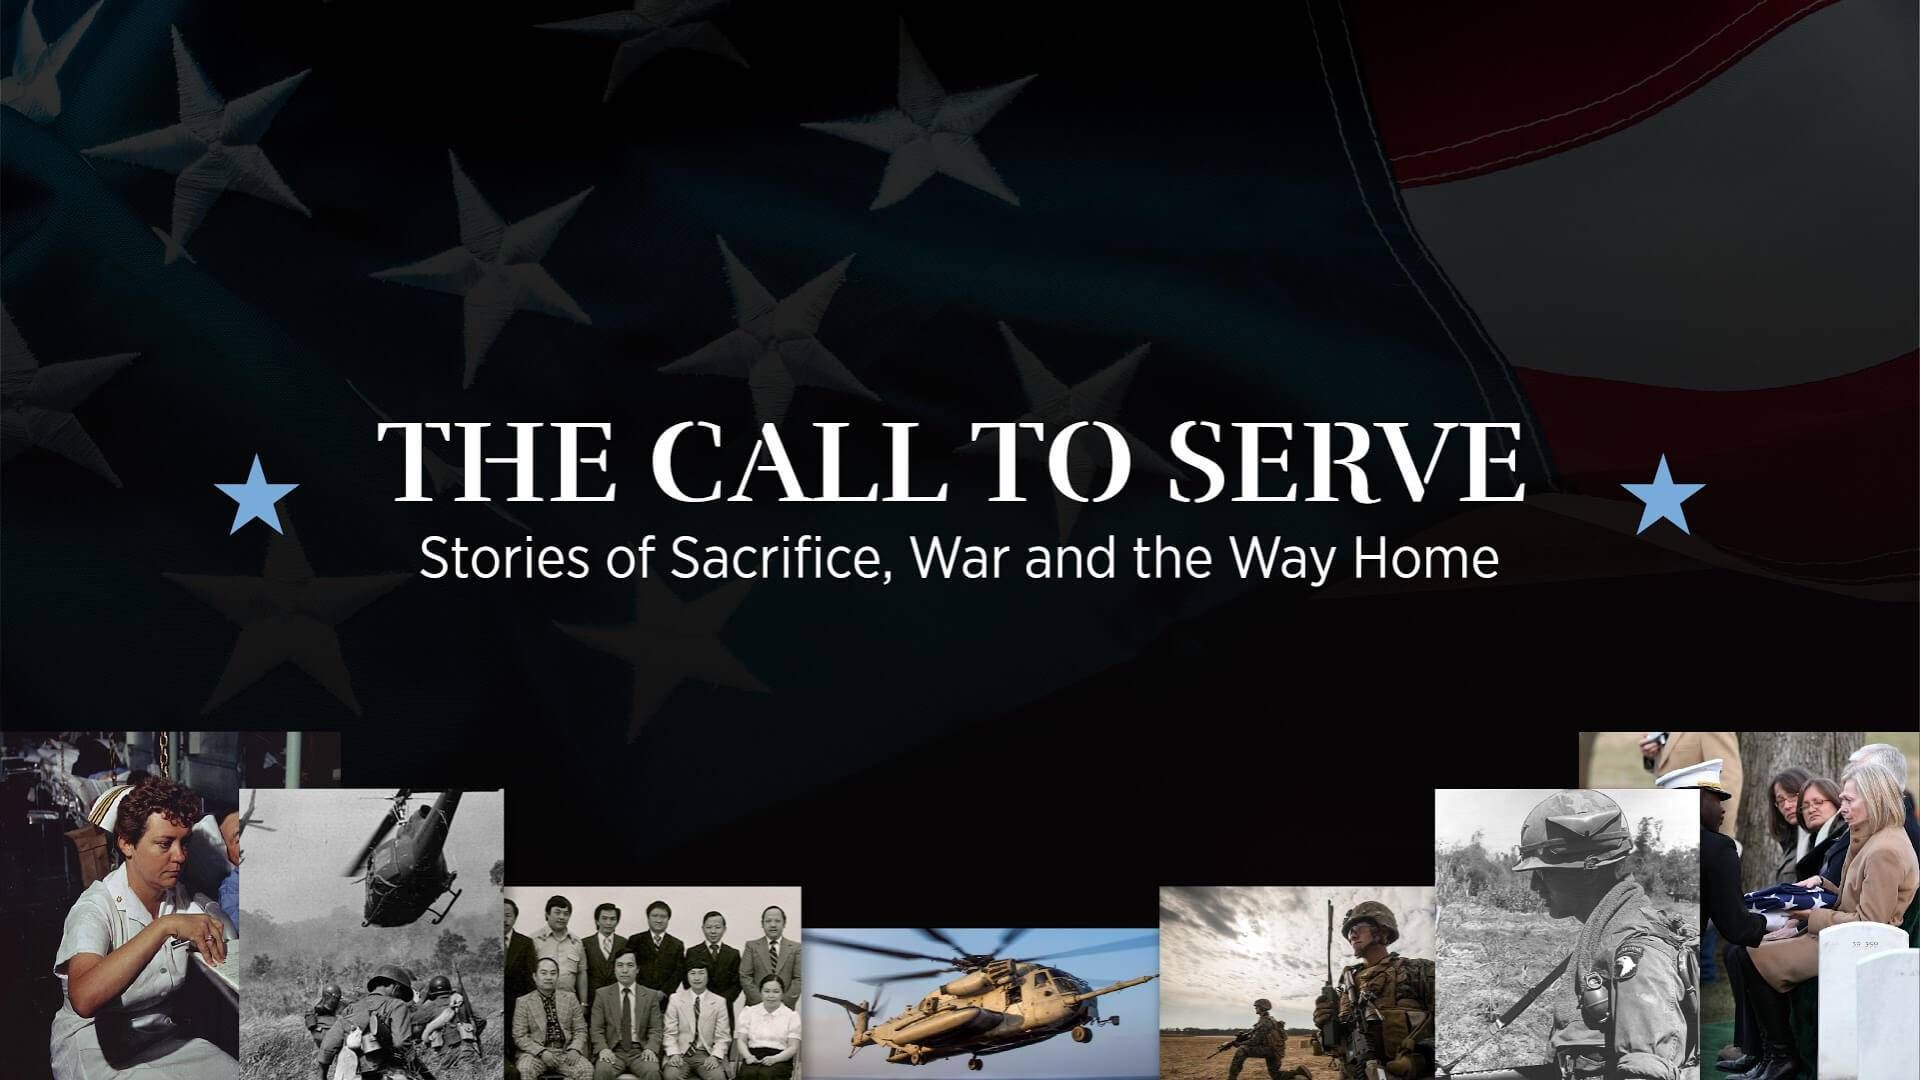 The title "The Call to Serve, Stories of Sacrifice, War and the Way Home" is laid over the image of a faded American flag background.  There are two blue stars, one on each side of the title.  Along the bottom of the image is a compilation of other images that include soldiers, a nurse, combat helicopters, a family at a soldier's funeral.  